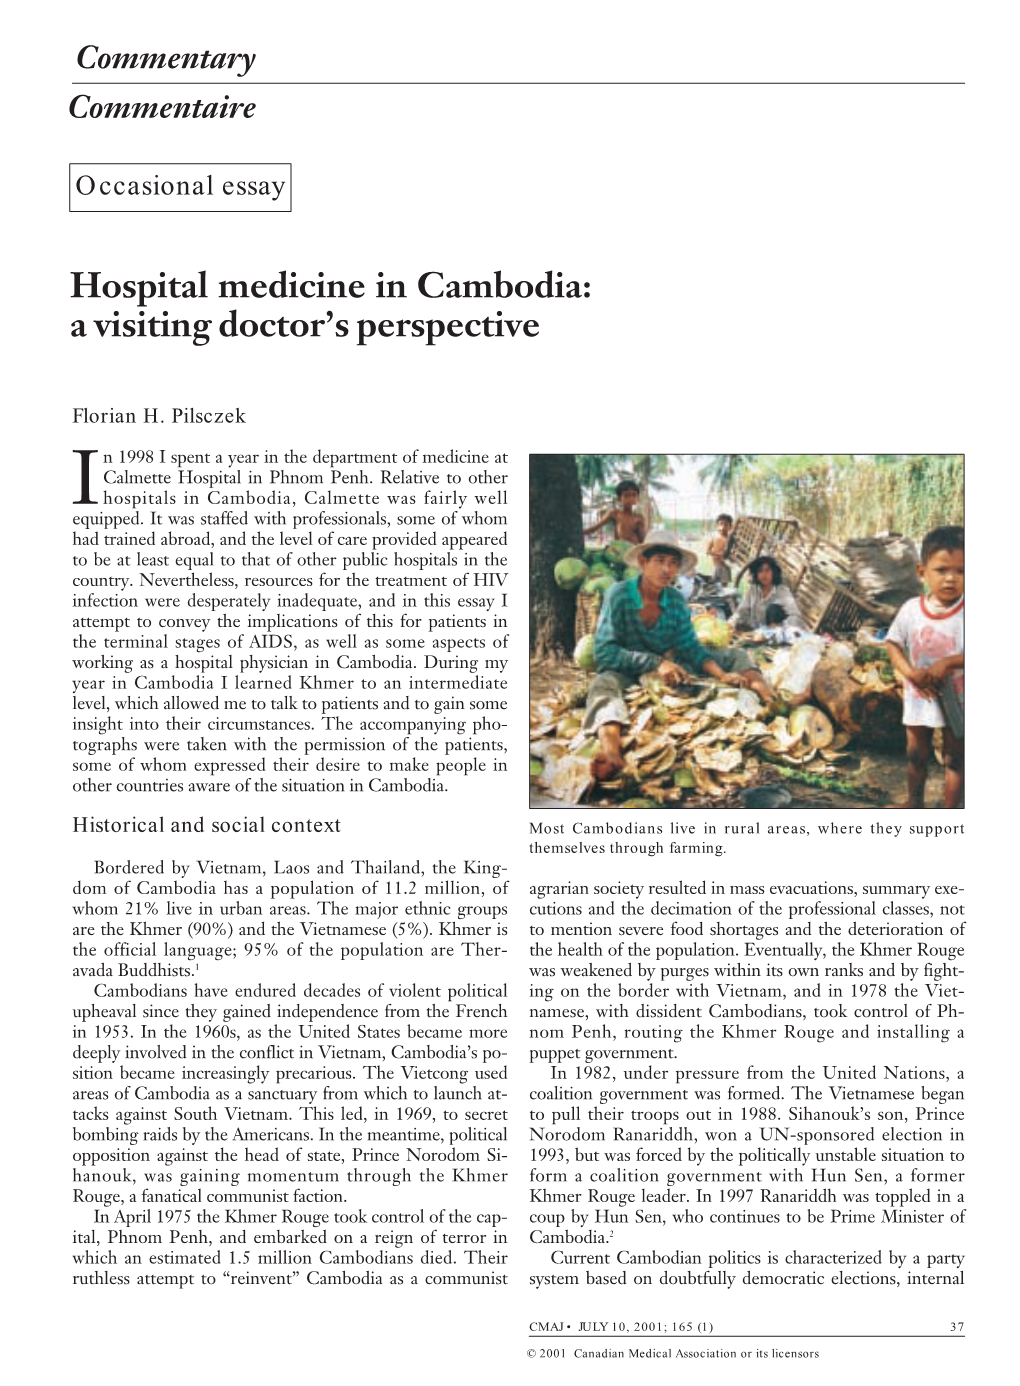 Hospital Medicine in Cambodia: a Visiting Doctor’S Perspective